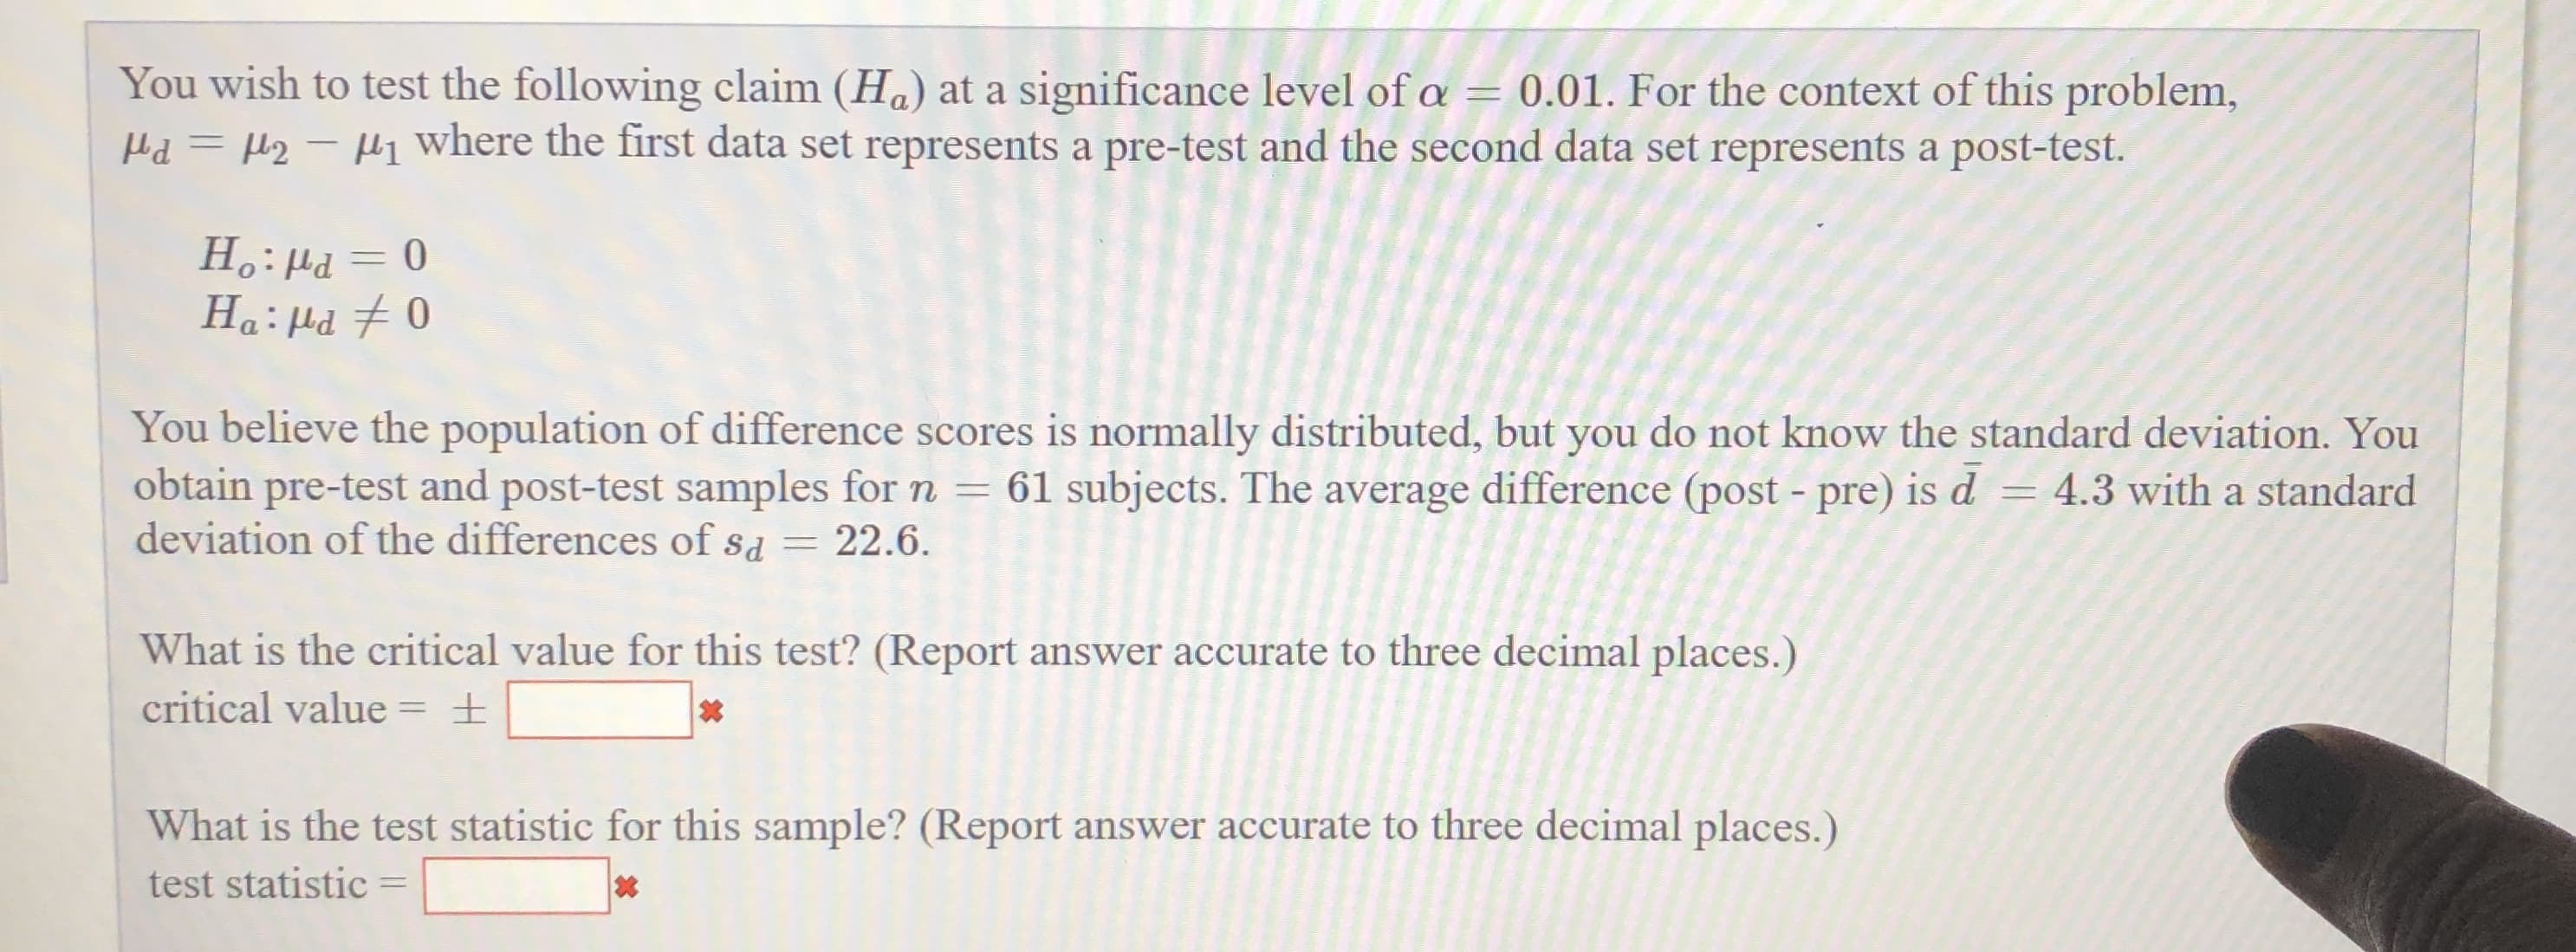 You wish to test the following claim (Ha) at a significance level of a
Hd = µ2 – Hl¡ where the first data set represents a pre-test and the second data set represents a post-test.
= 0.01. For the context of this problem,
%3/
Ha: Hd 7 0
0 = Prl :°H
You believe the population of difference scores is normally distributed, but you do not know the standard deviation. You
obtain pre-test and post-test samples for n = 61 subjects. The average difference (post - pre) is d
deviation of the differences of sd = 22.6.
= 4.3 with a standard
What is the critical value for this test? (Report answer accurate to three decimal places.)
critical value = ±
%3D
What is the test statistic for this sample? (Report answer accurate to three decimal places.)
test statistic =
%3D
